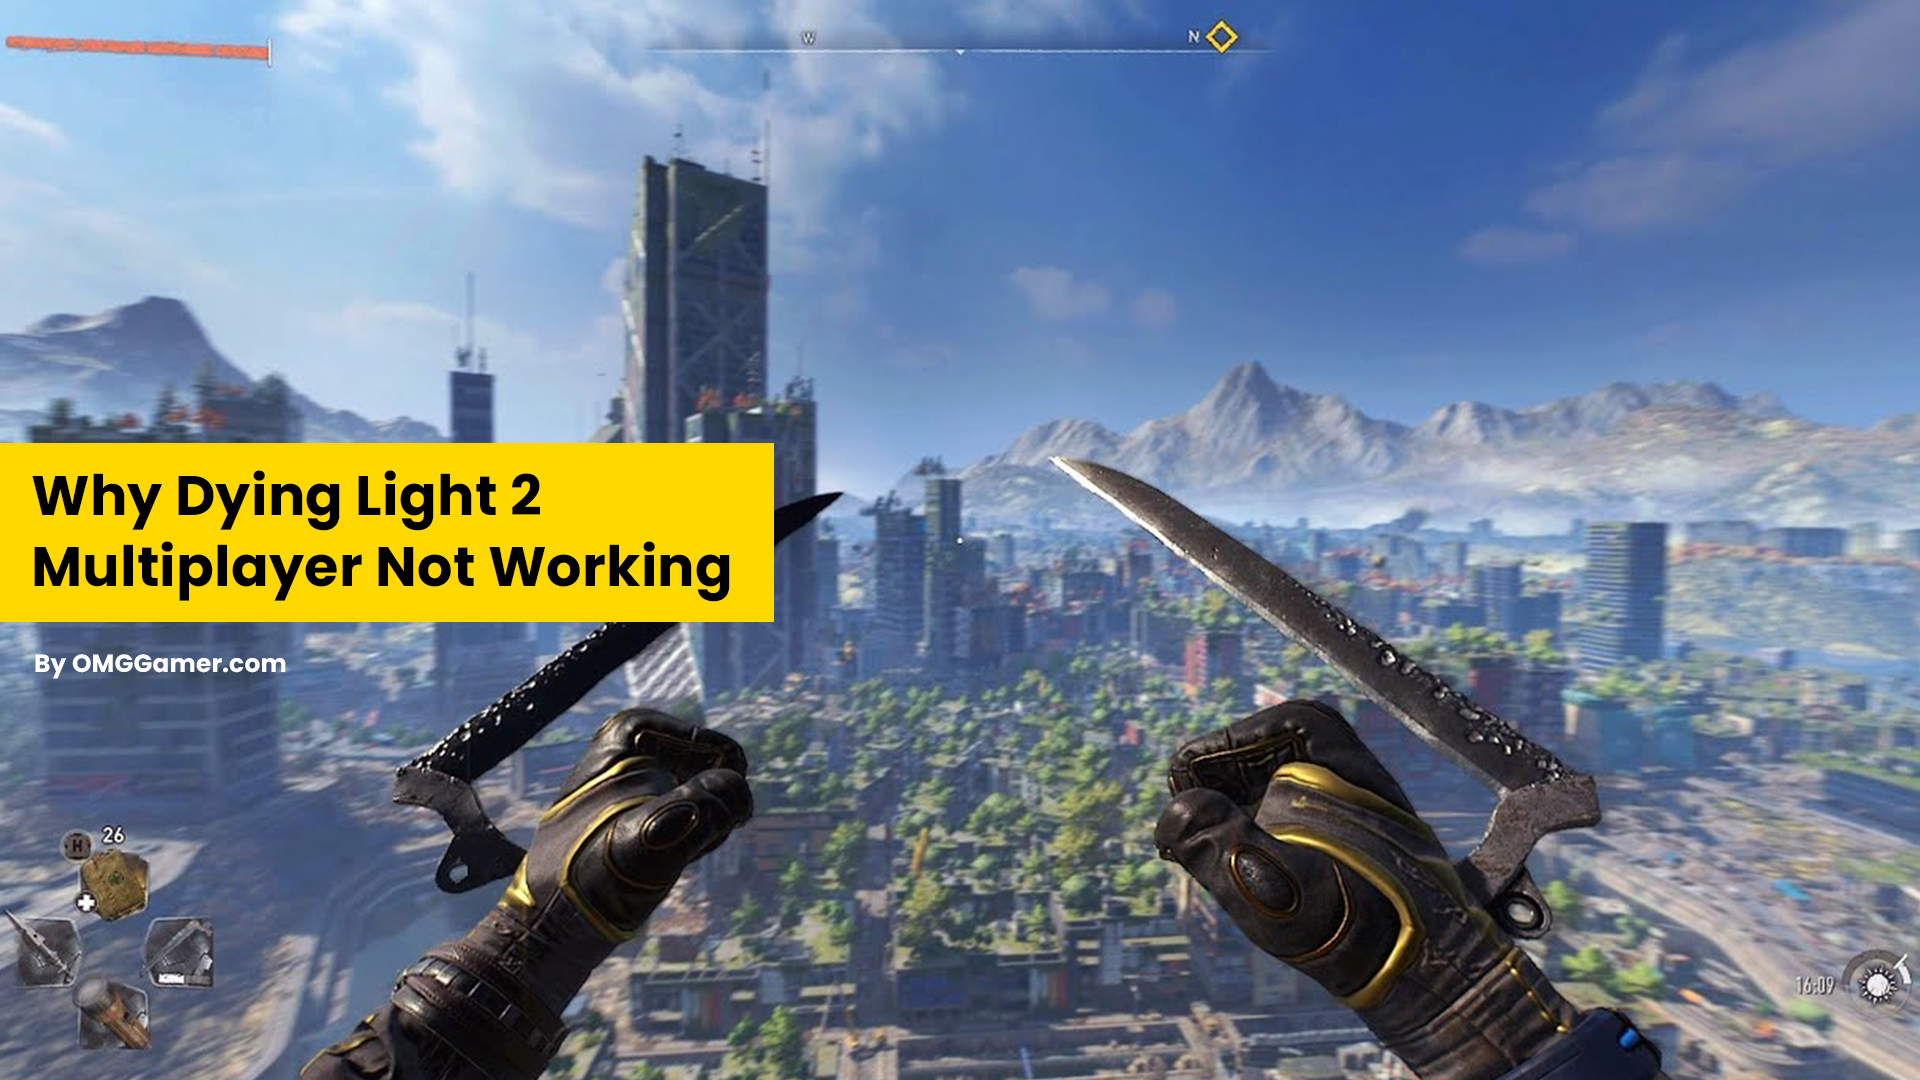 Why Dying Light 2 Multiplayer Not Working